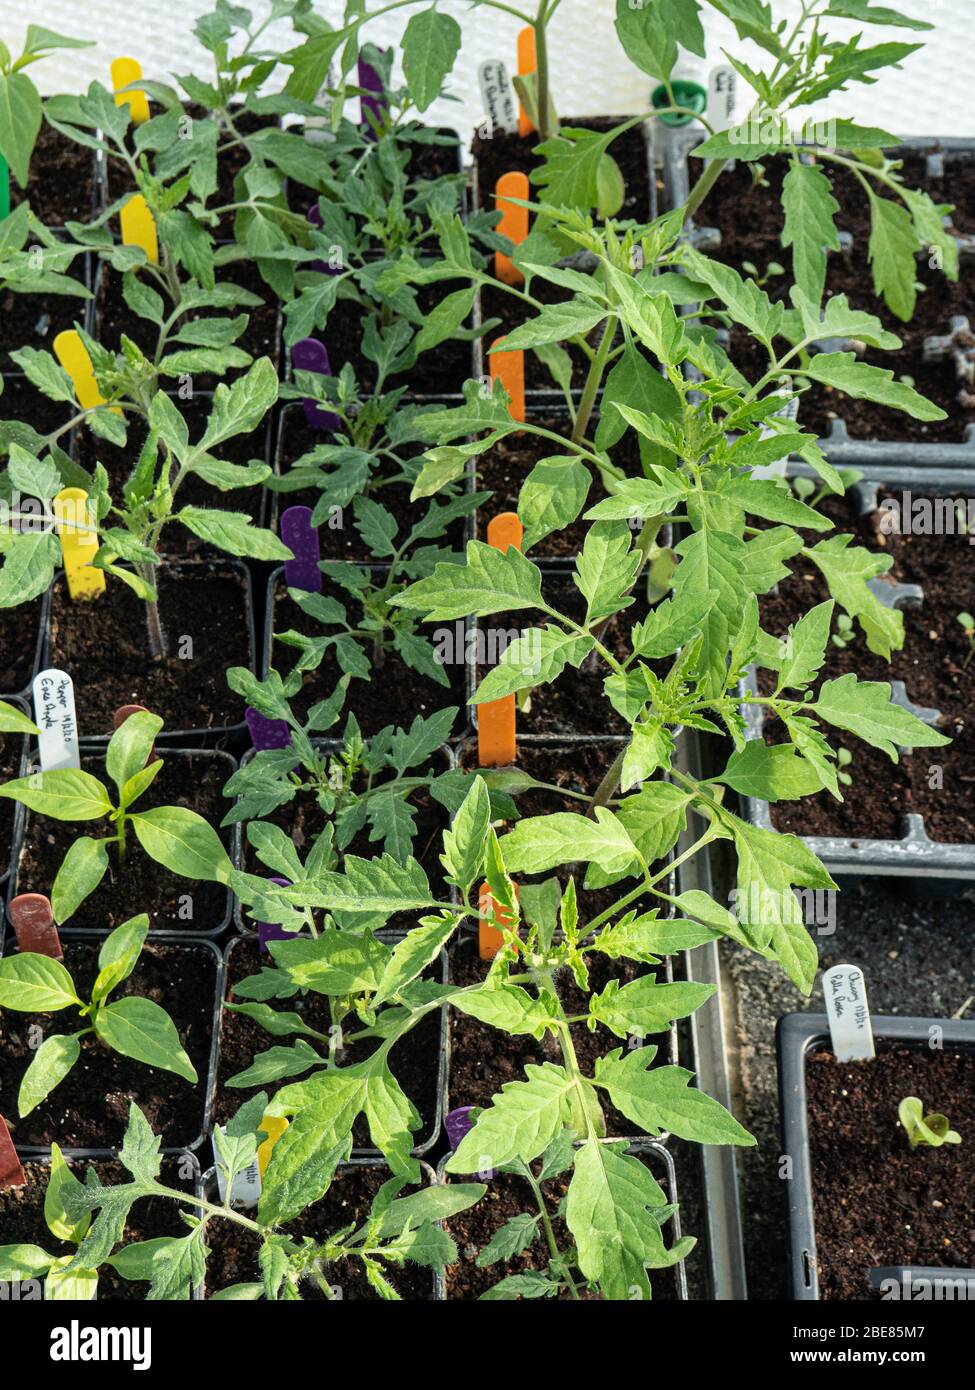 A group of young tomato and pepper plants growing on in pots in a greenhouse Stock Photo